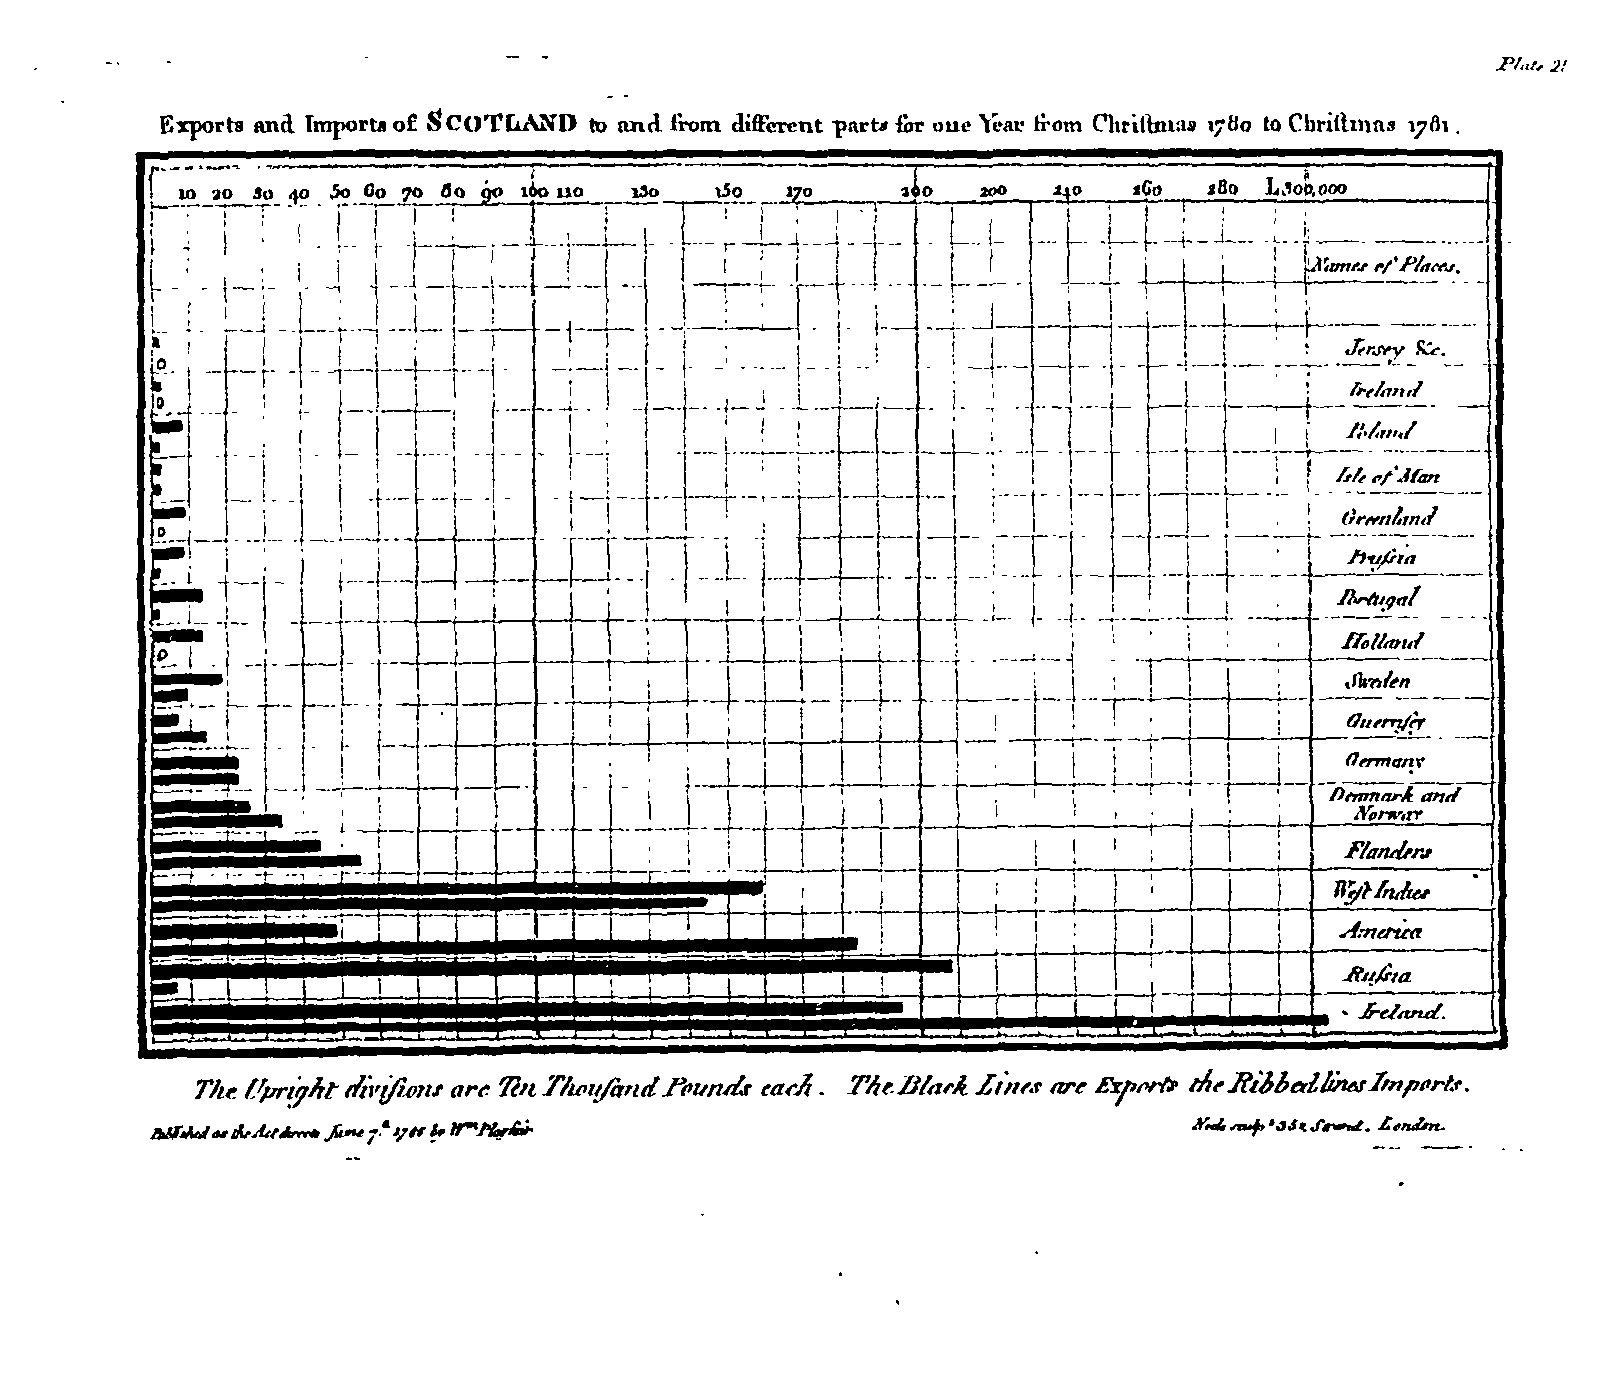 Exports and Imports of Scotland to and from different parts for one Year from Christmas 1780 to Christmans 1781